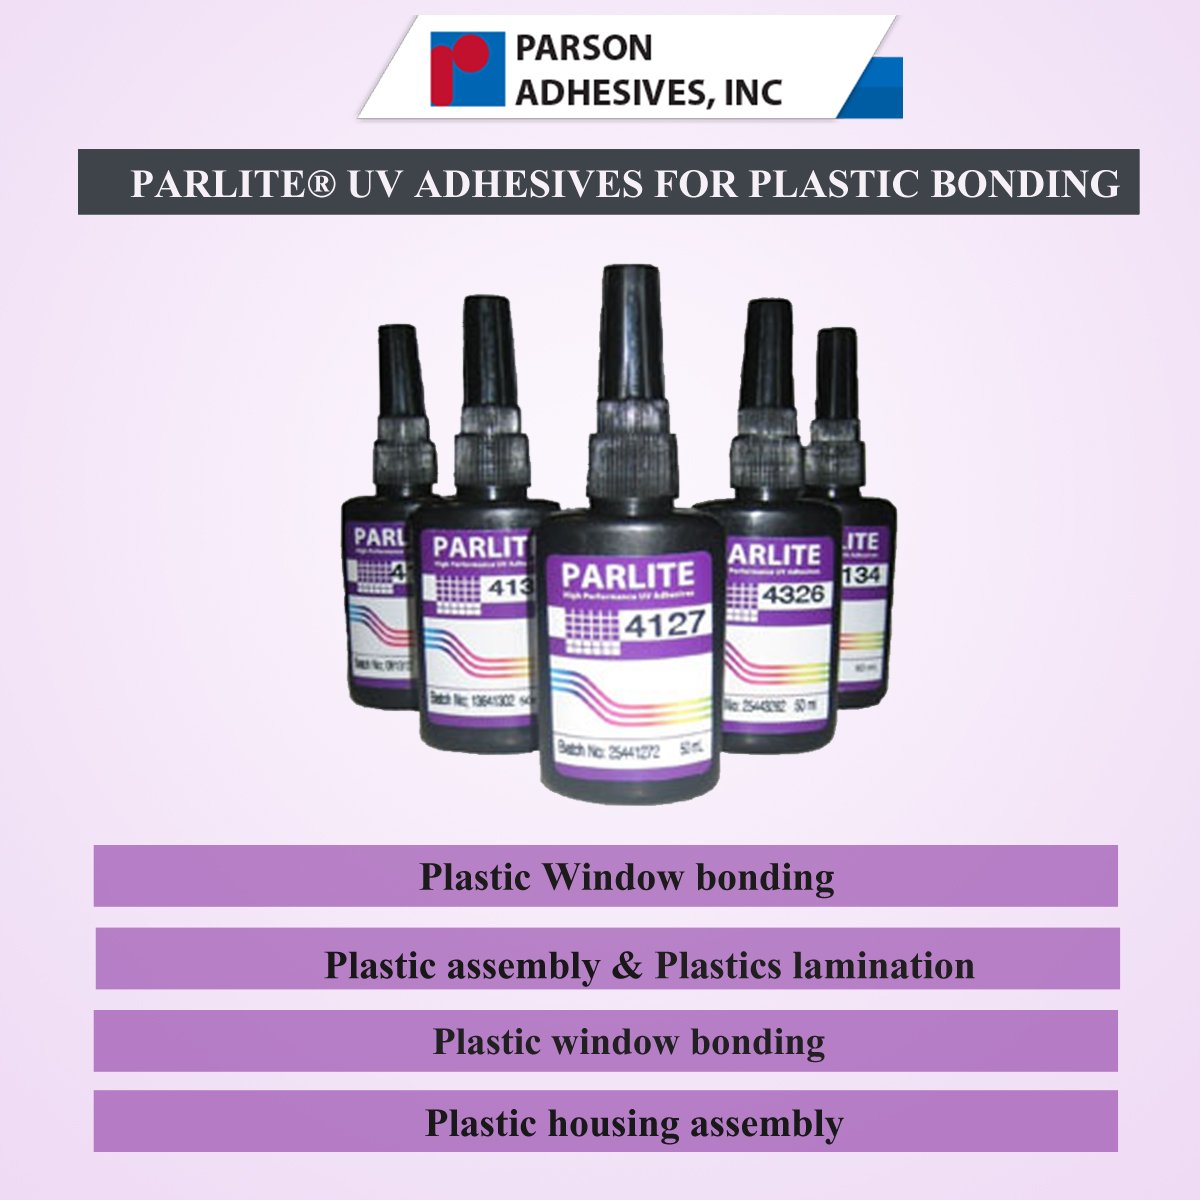 UV Curable Adhesives - widely used in manufacturing of glassware, optical devices and medical equipment. 
Visit us @ParsonAdhesives : goo.gl/u9VH1q  
#IndustrialAdhesives #AnaerobicAdhesives #EngineeringApplications #ParsonAdhesives